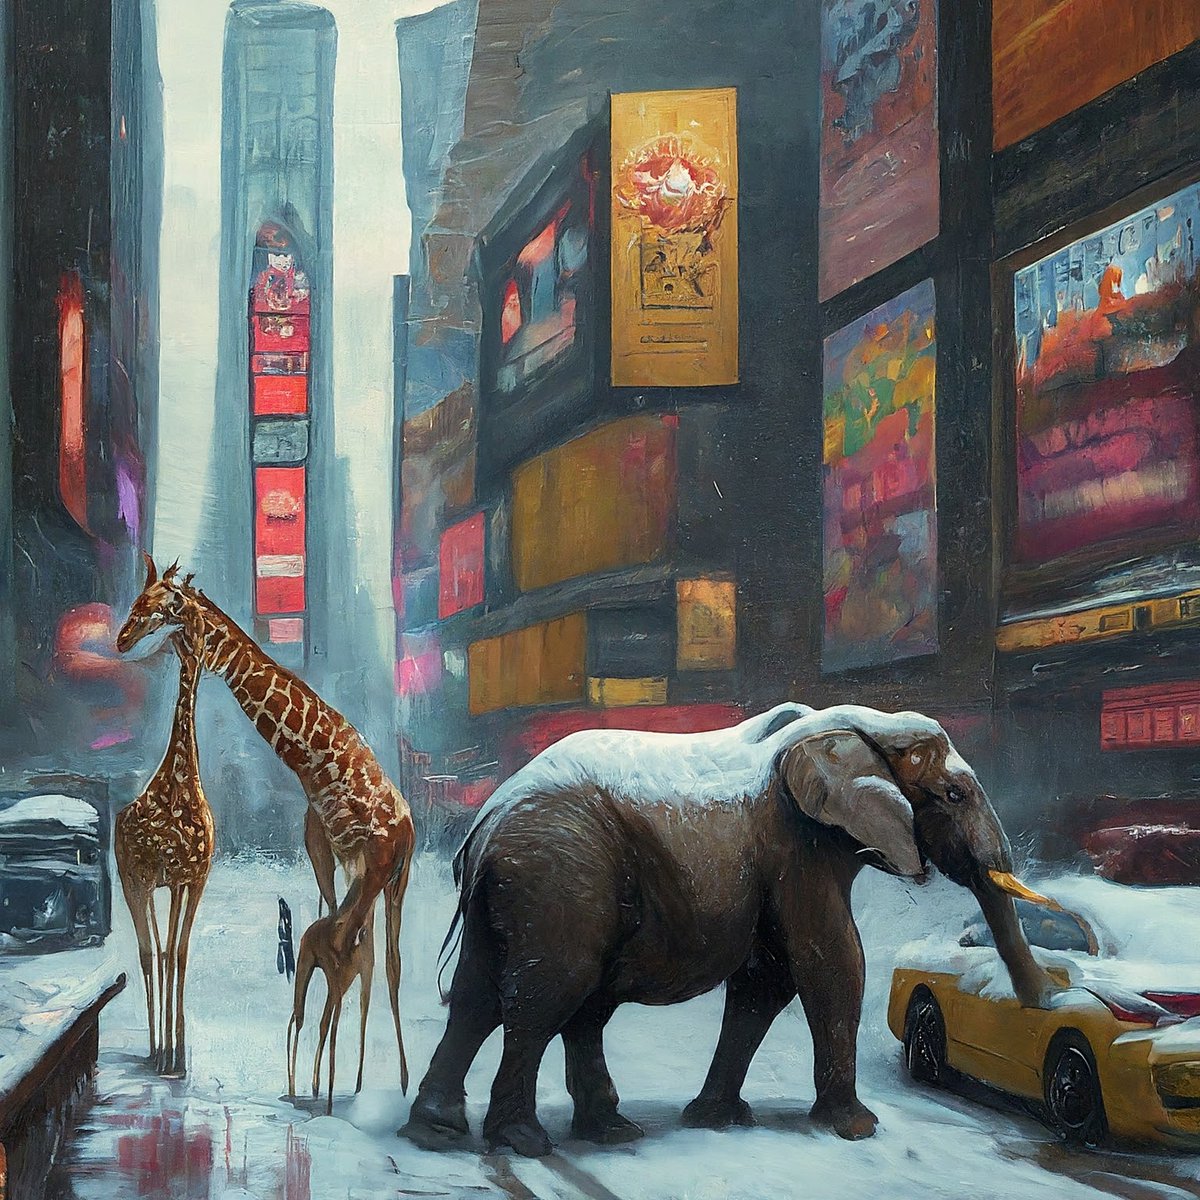 Just witnessed a giraffe-ic traffic jam in Times Square! Three giraffes  and an elephant trying to hail a cab in this freezing weather. New York  City never disappoints with its wild surprises! ❄️🦒🦒🦒🐘 #OnlyInNYC  #GiraffesInTheCity #WinterWonderland